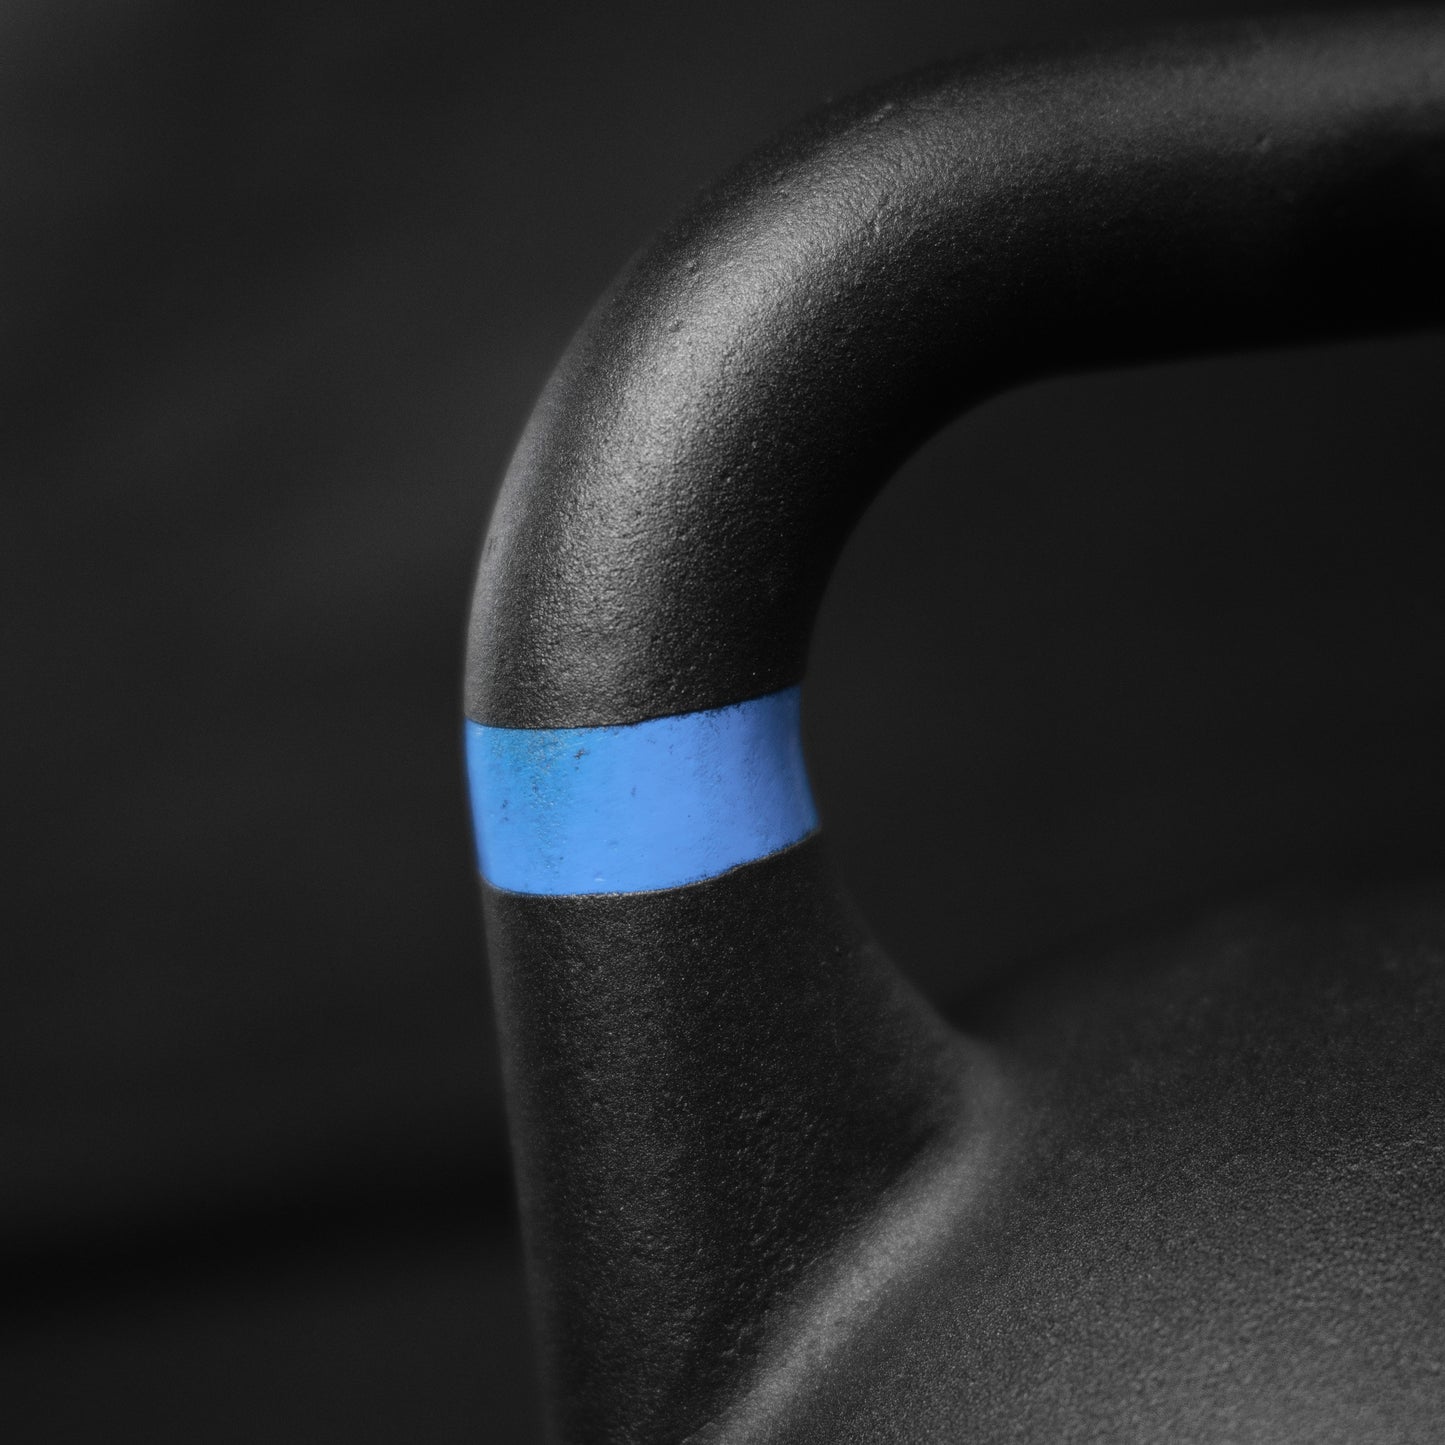 Powder Coated Competition Kettlebells